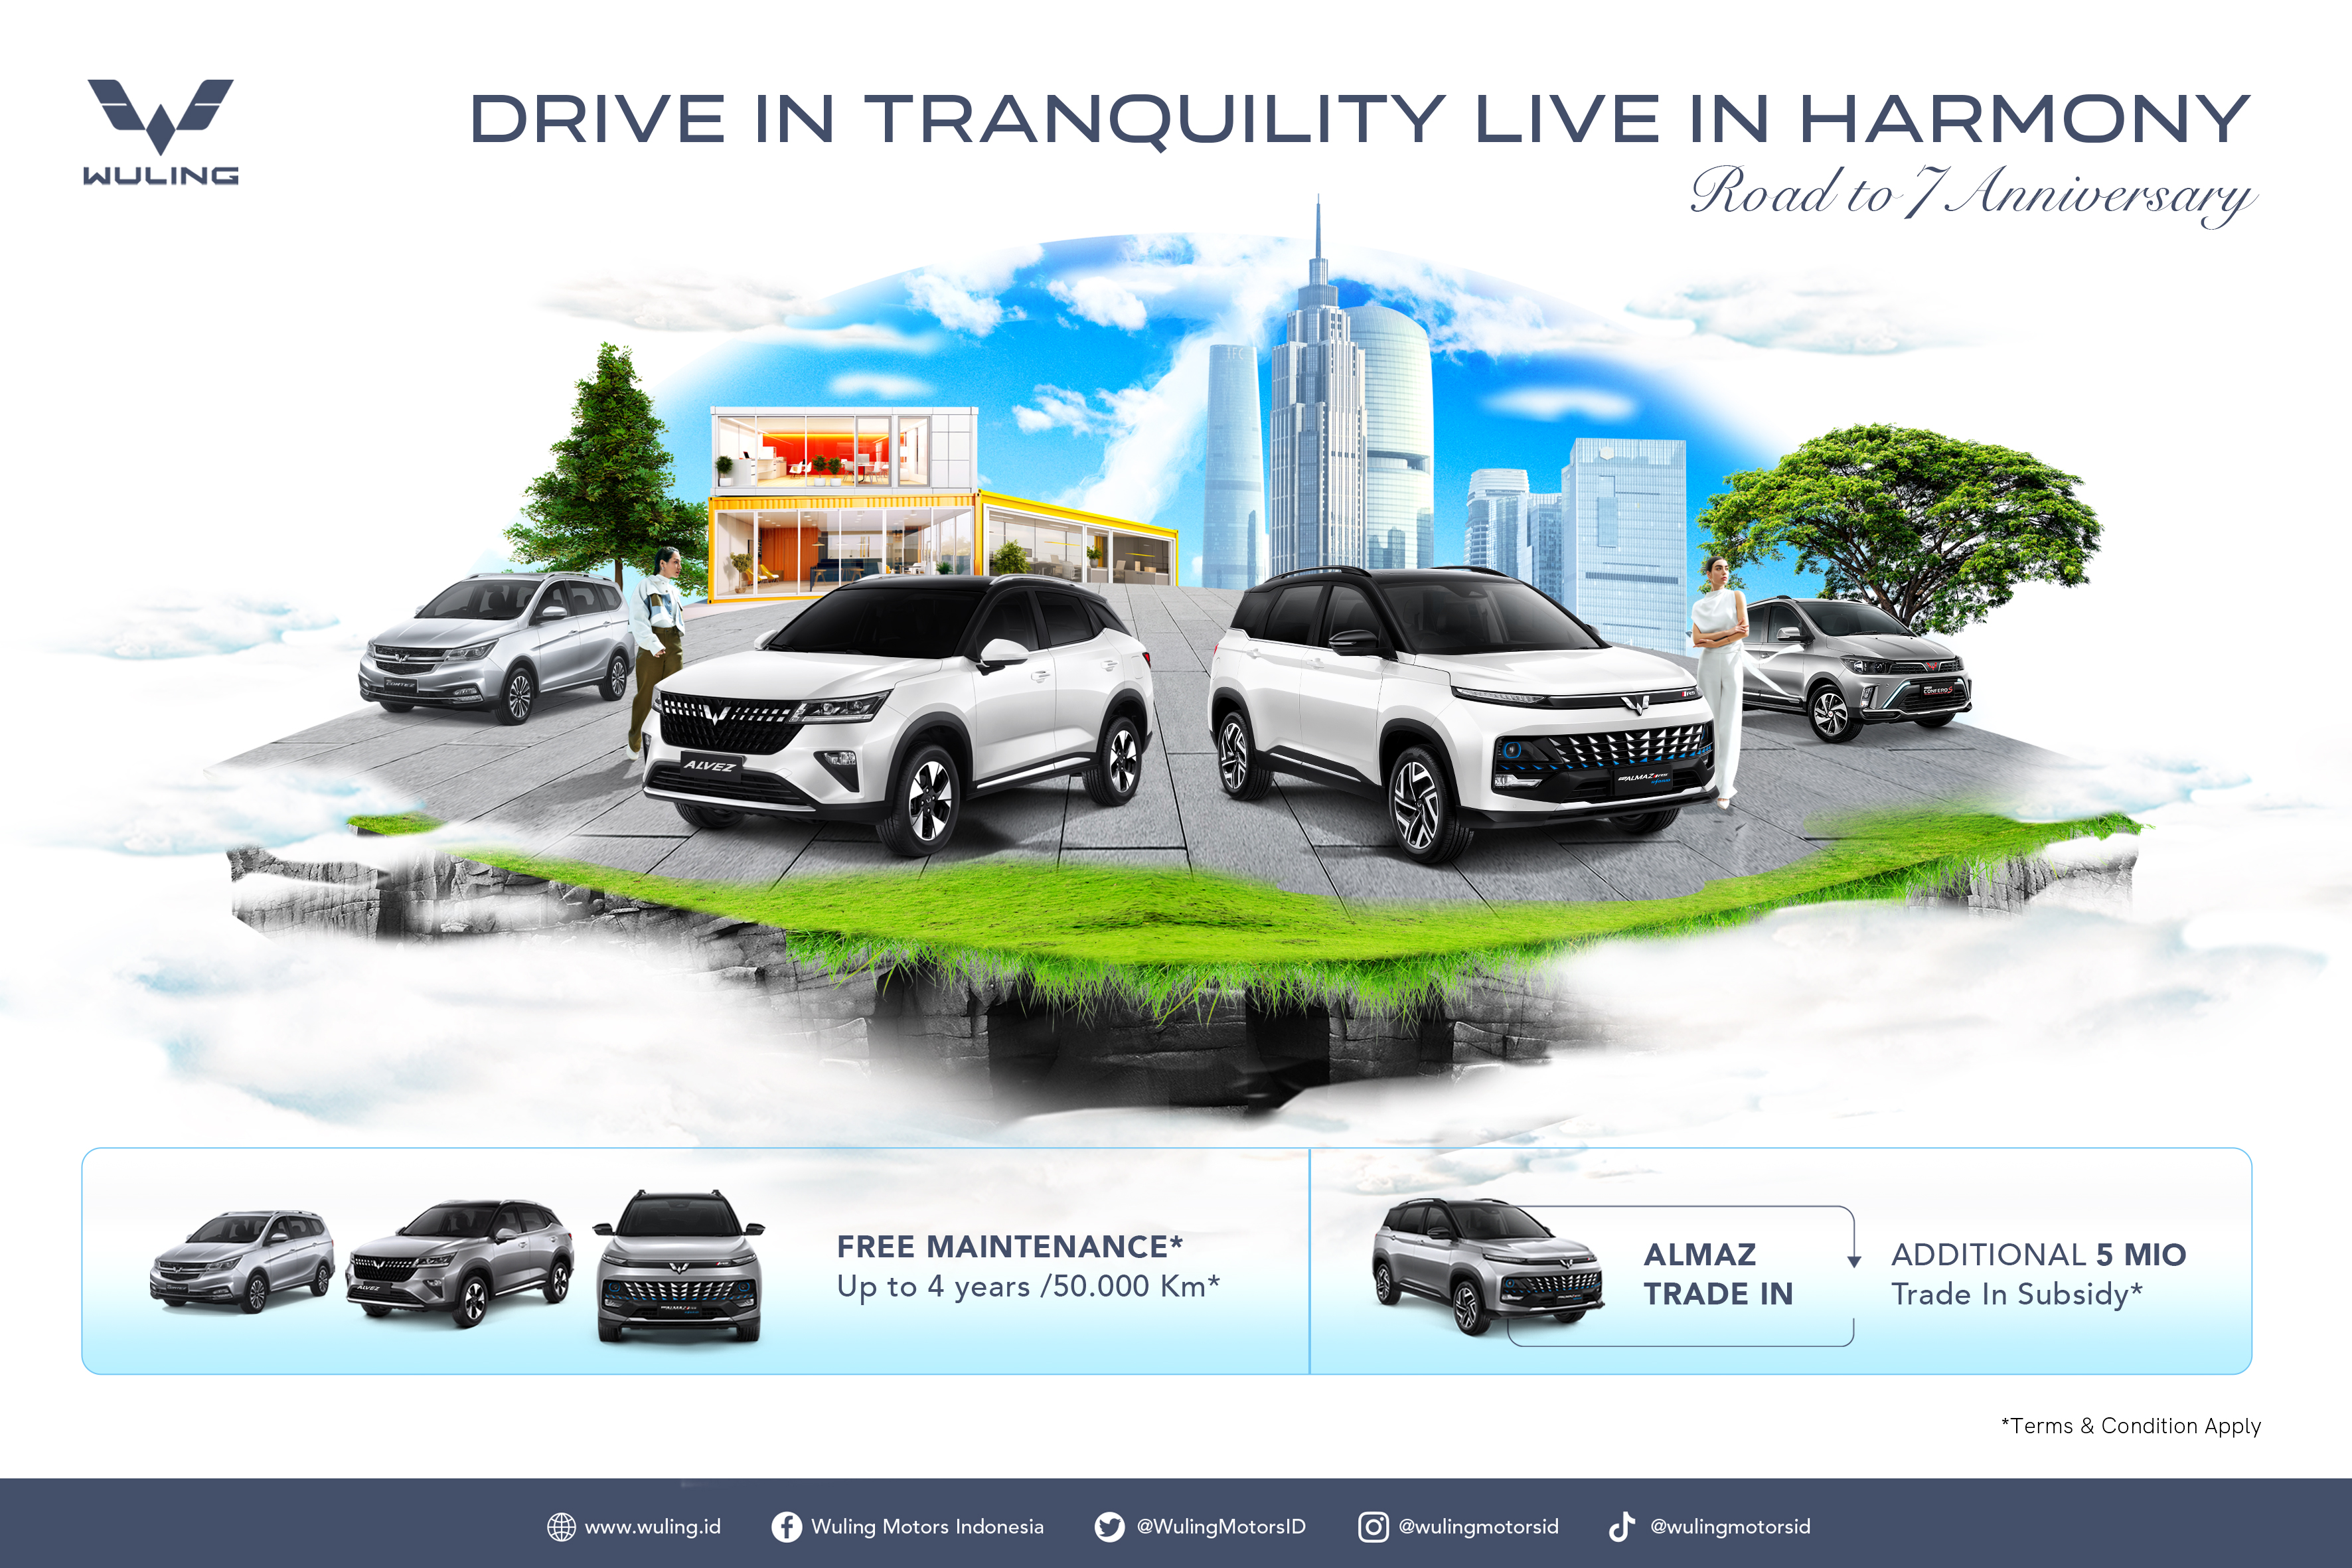 Image Wuling Celebrates June with Special Promo ‘Drive In Tranquility Live in Harmony’